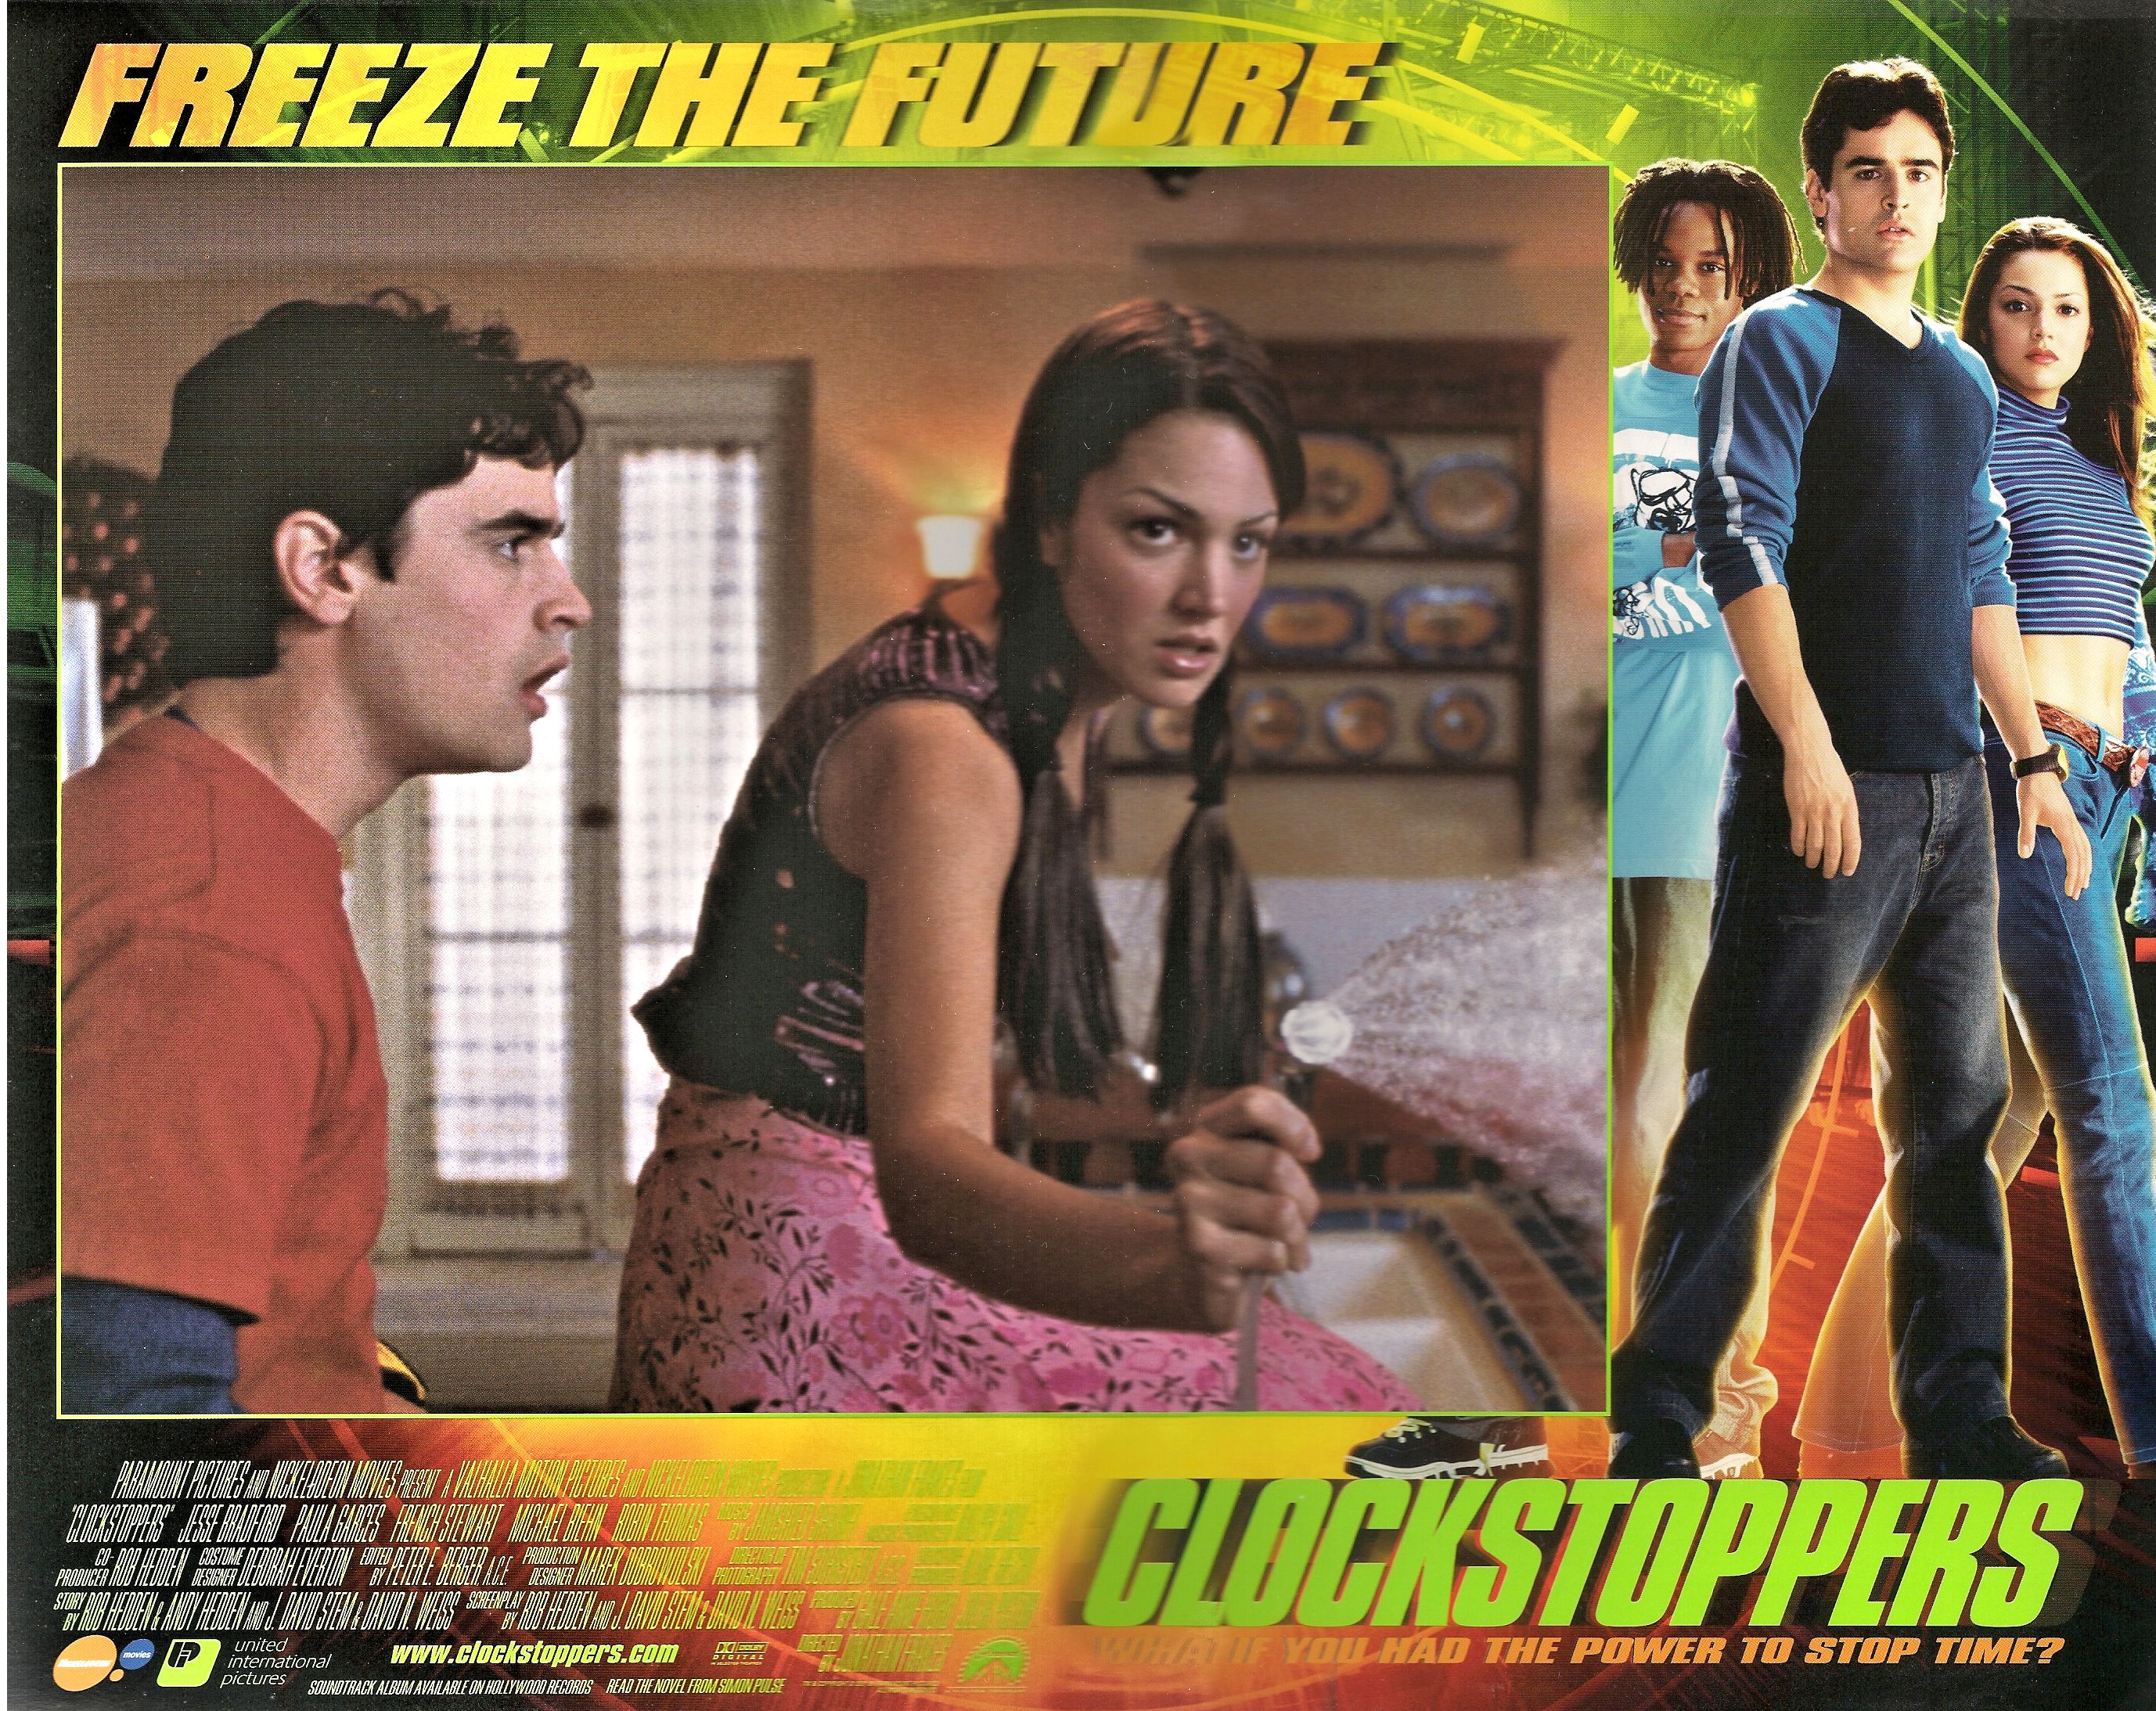 Clockstoppers Lobby Poster 07
Keywords: media_publicity;clockstoppers_img